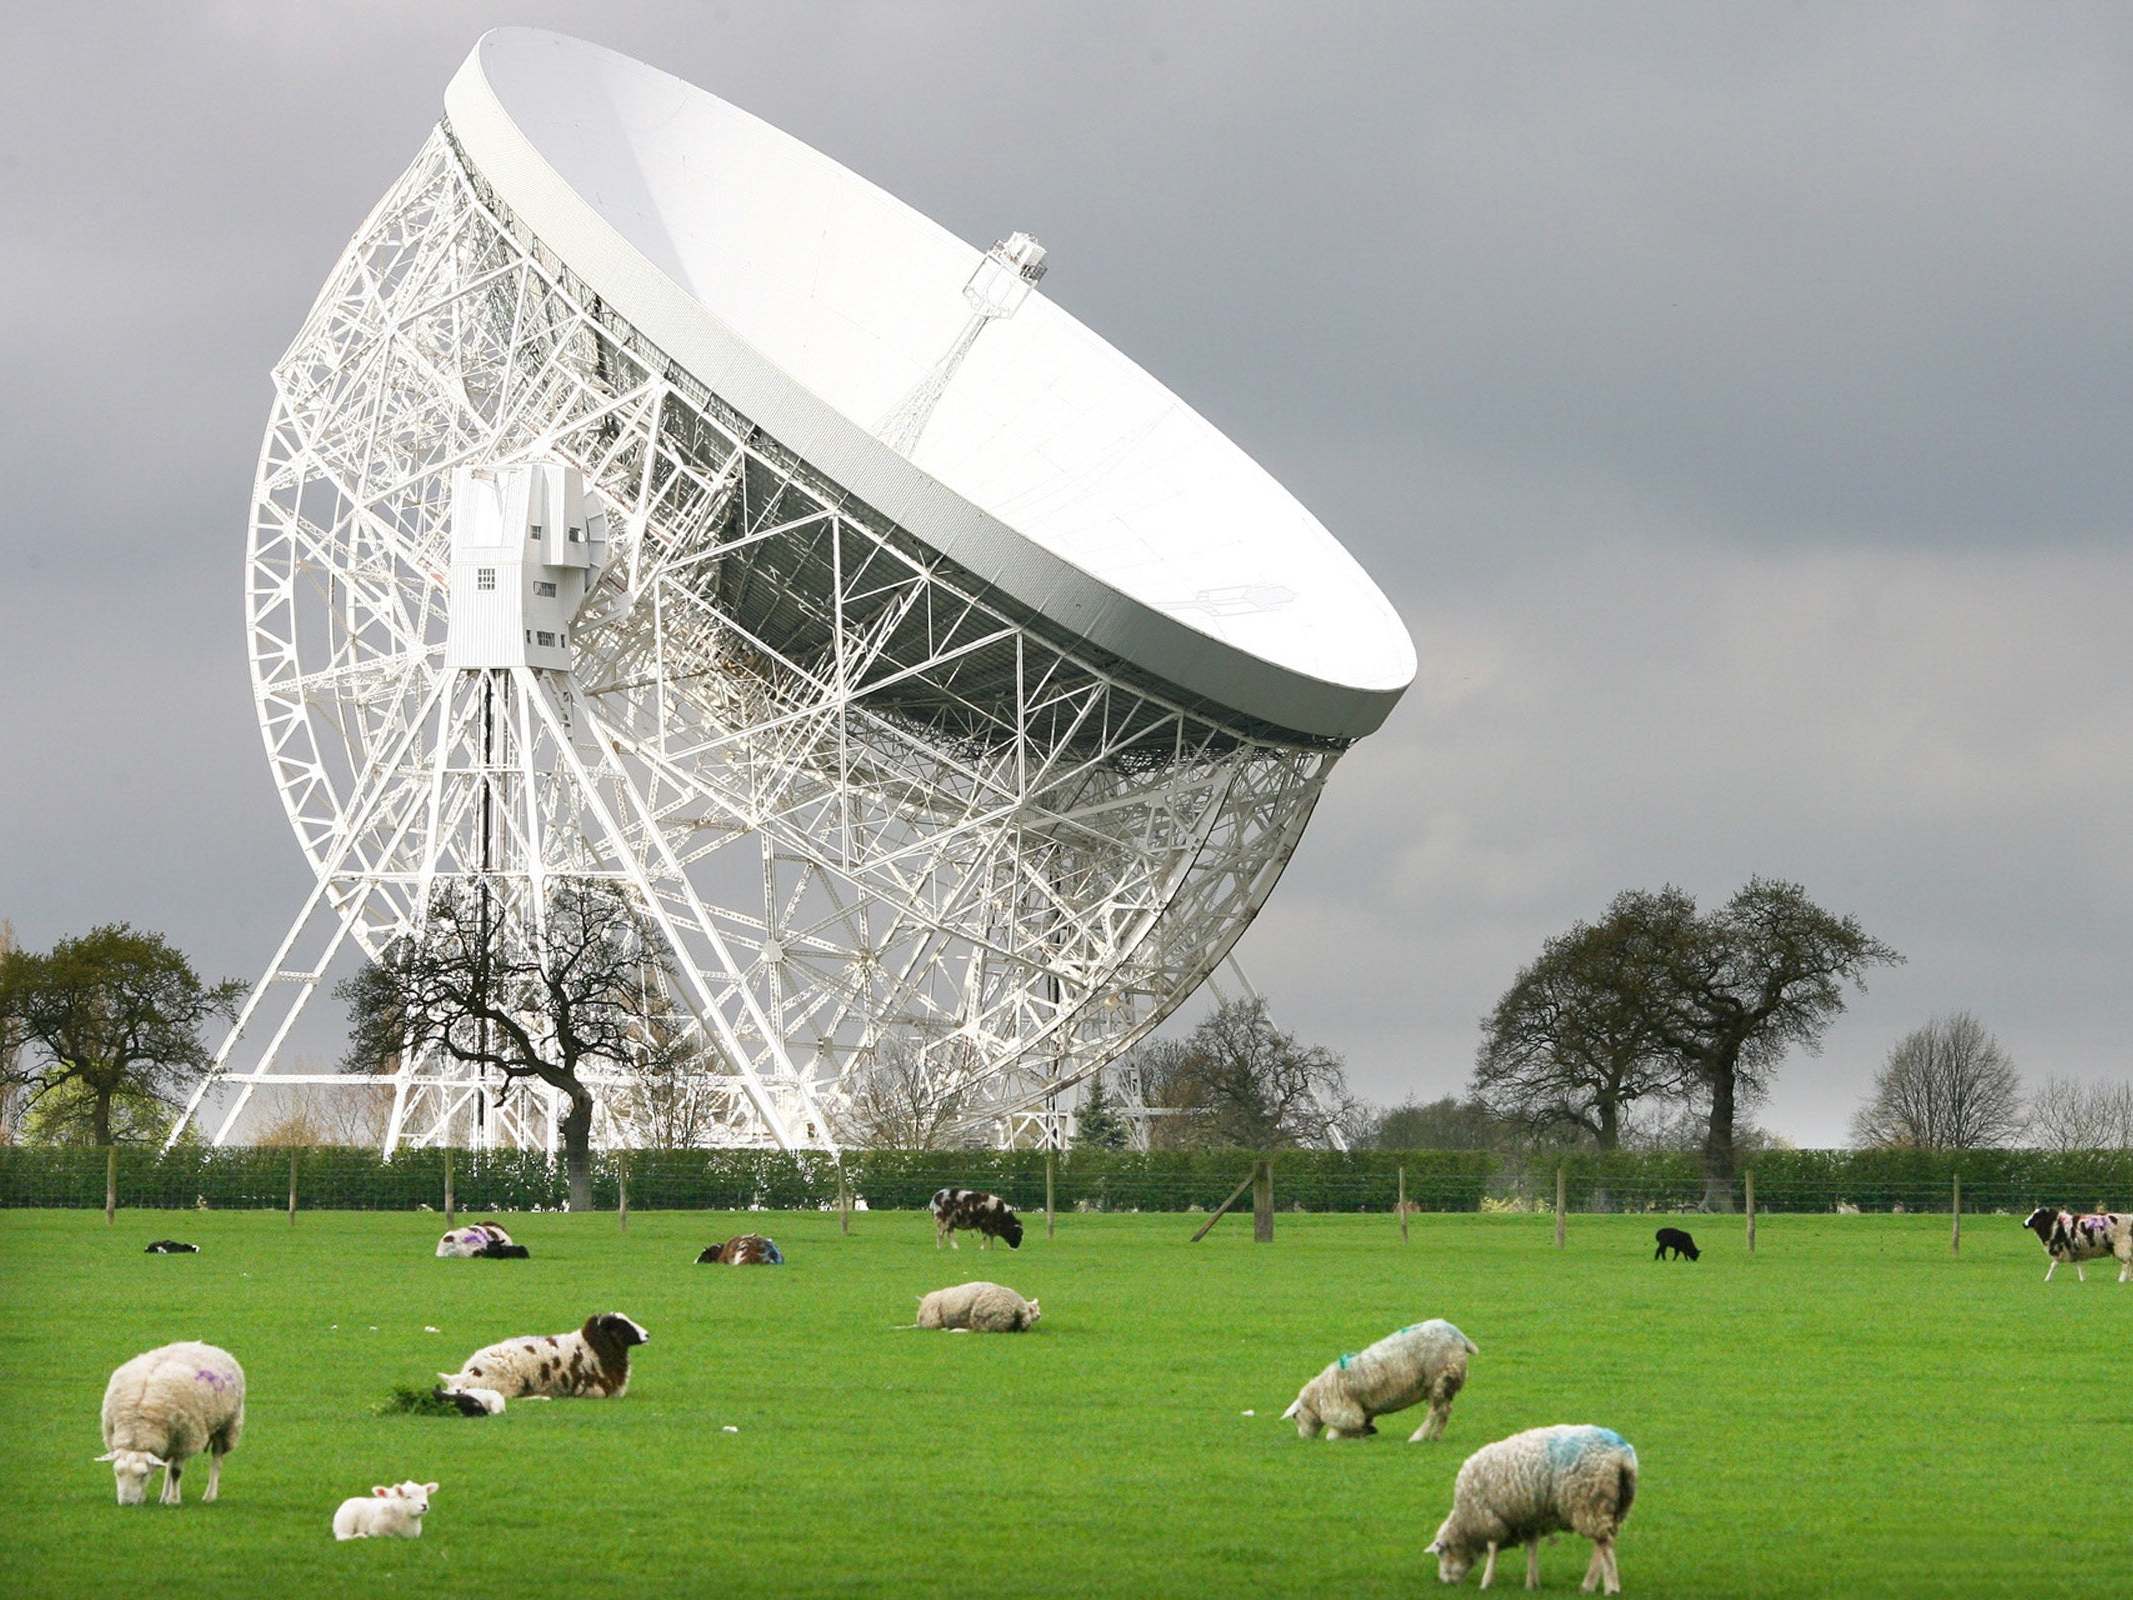 The Lovell Telescope is a well-known landmark near Holmes Chapel in Cheshire